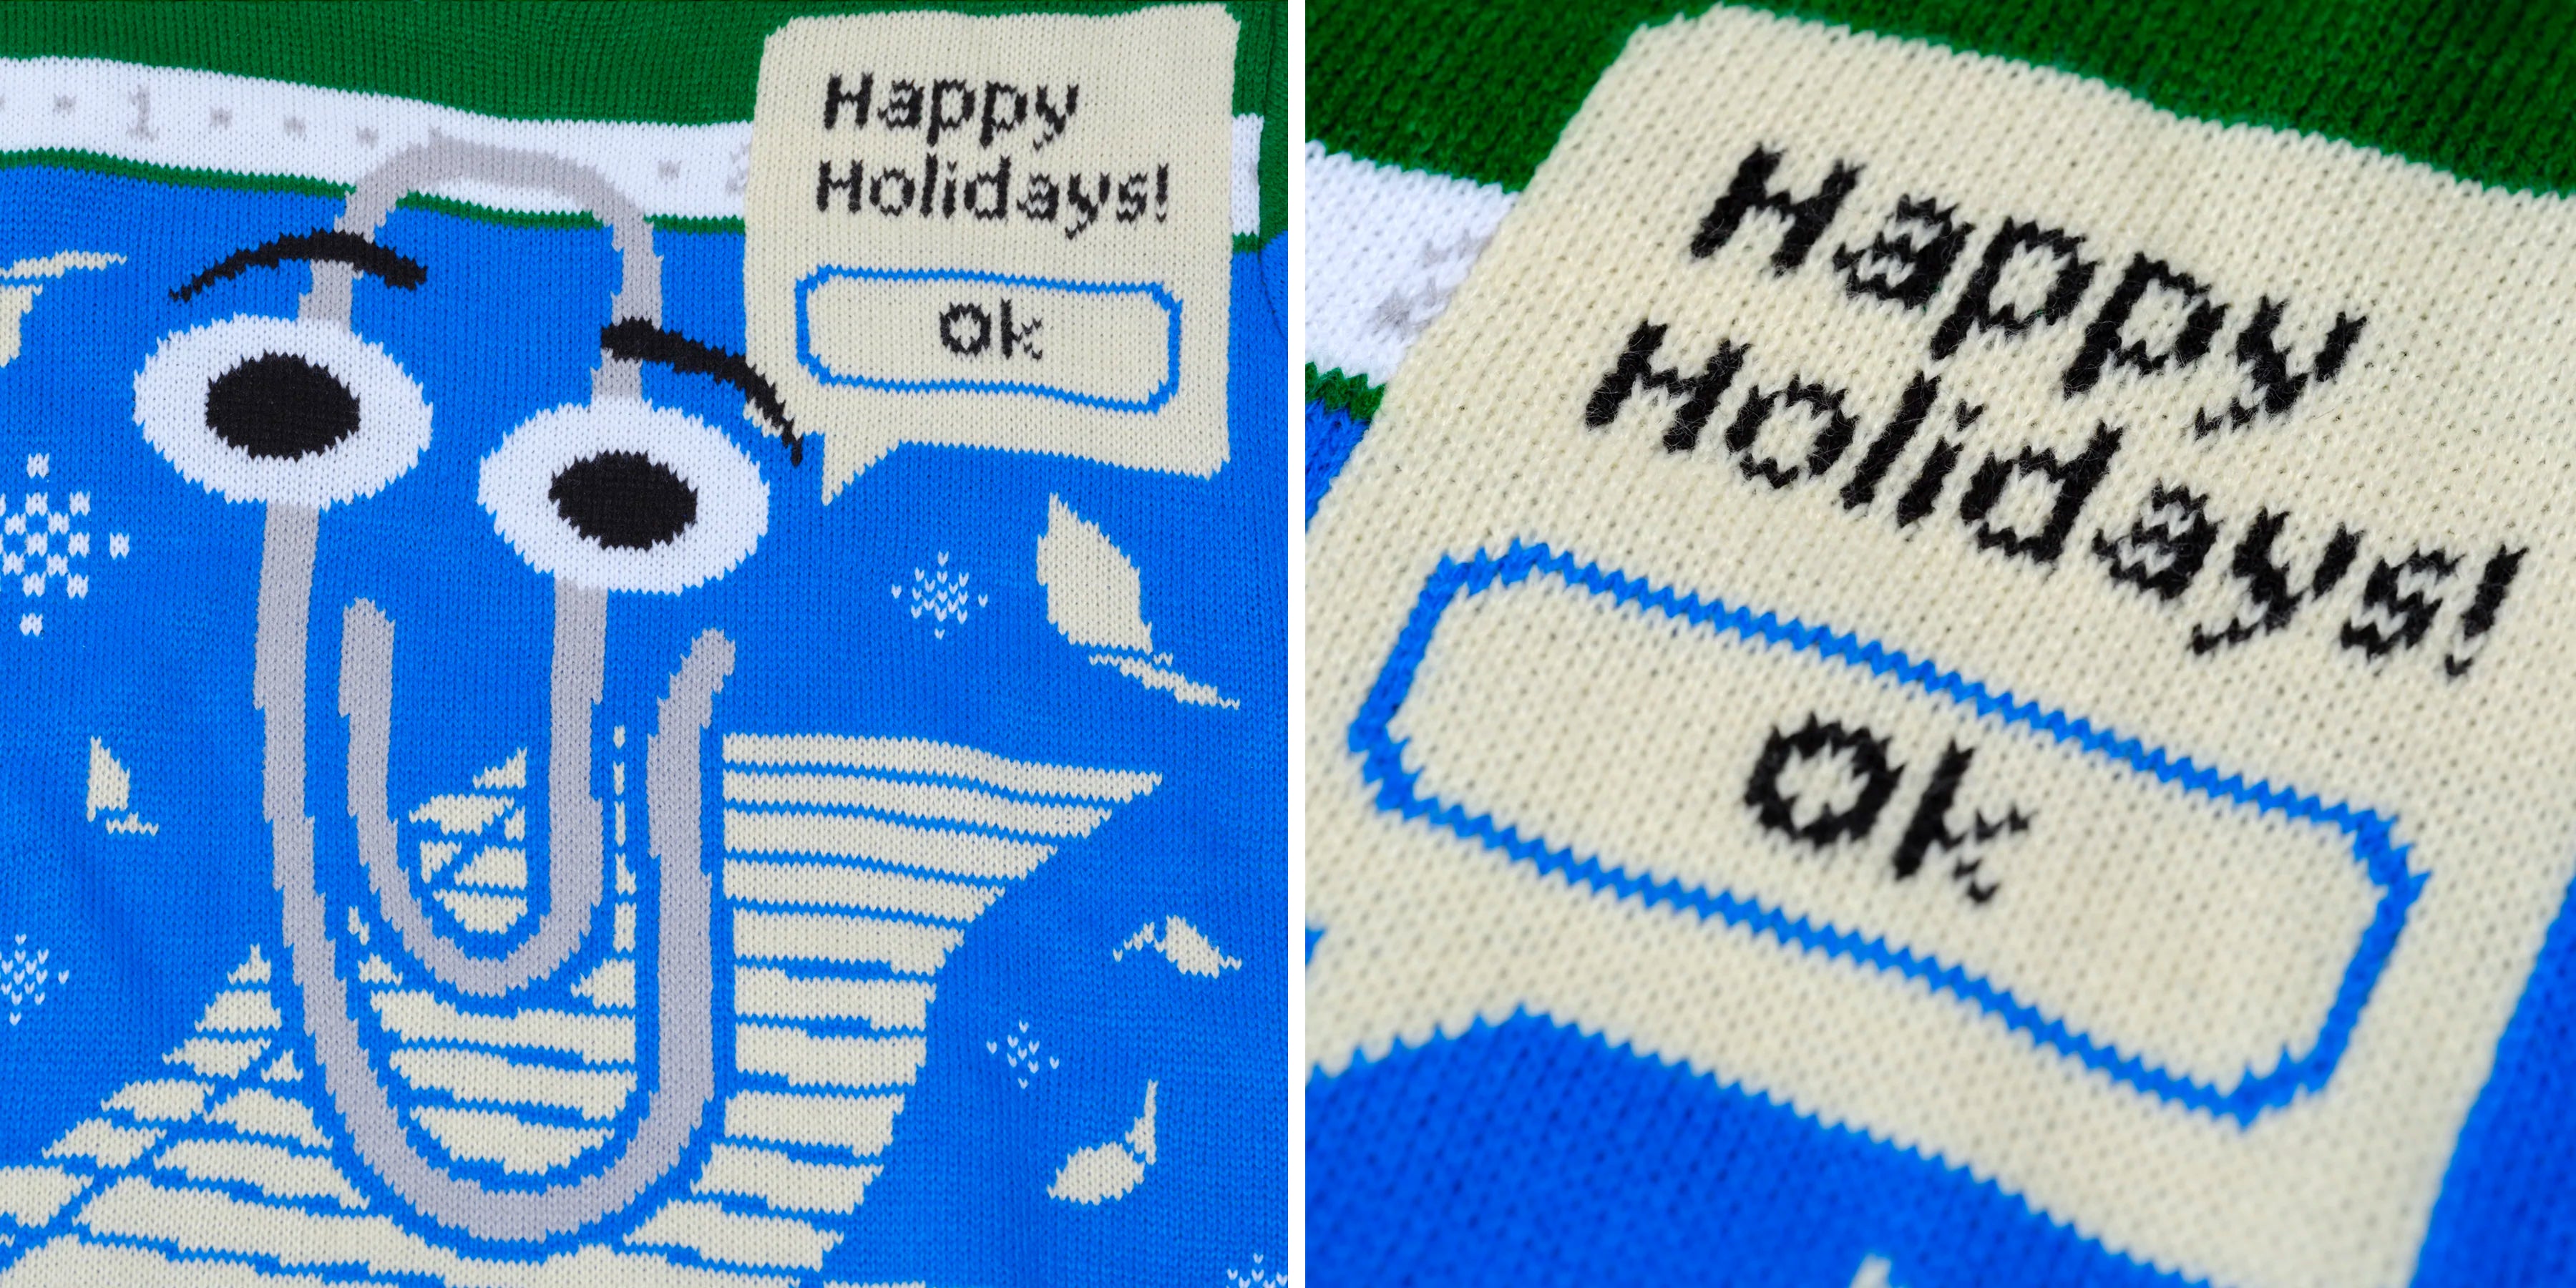 Clippy Takes Starring Role on Microsoft’s 2022 Ugly Holiday Sweater